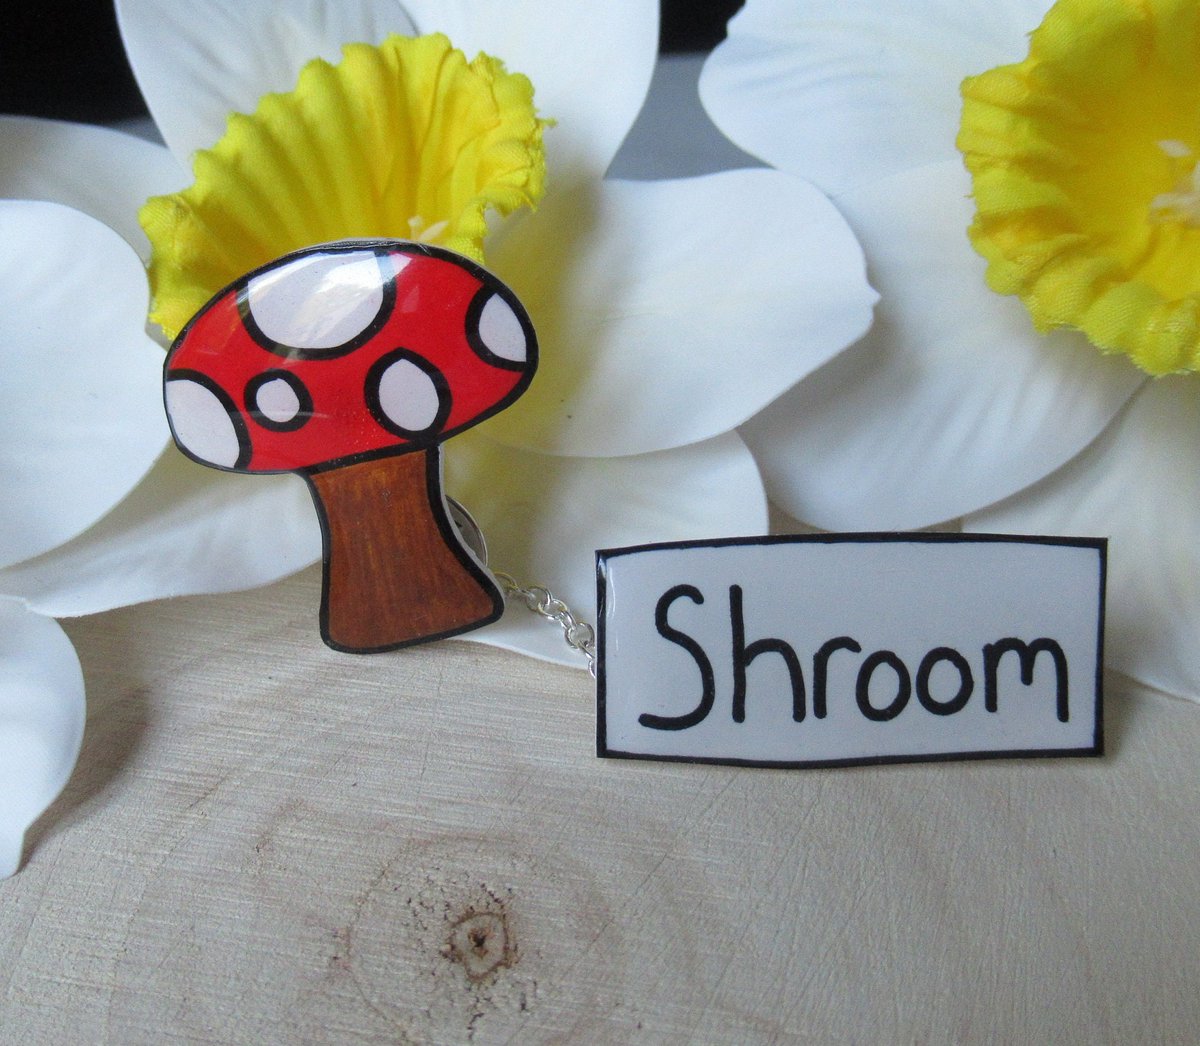 Shroomie pins are now live!! 🍄

Get one of these cute lil pin sets on my shop here 🌼: etsy.com/listing/148644…

#etsyshop #EtsySeller #mushrooms #EtsyHandmade #handmadepins
#pinbadges #etsysocial